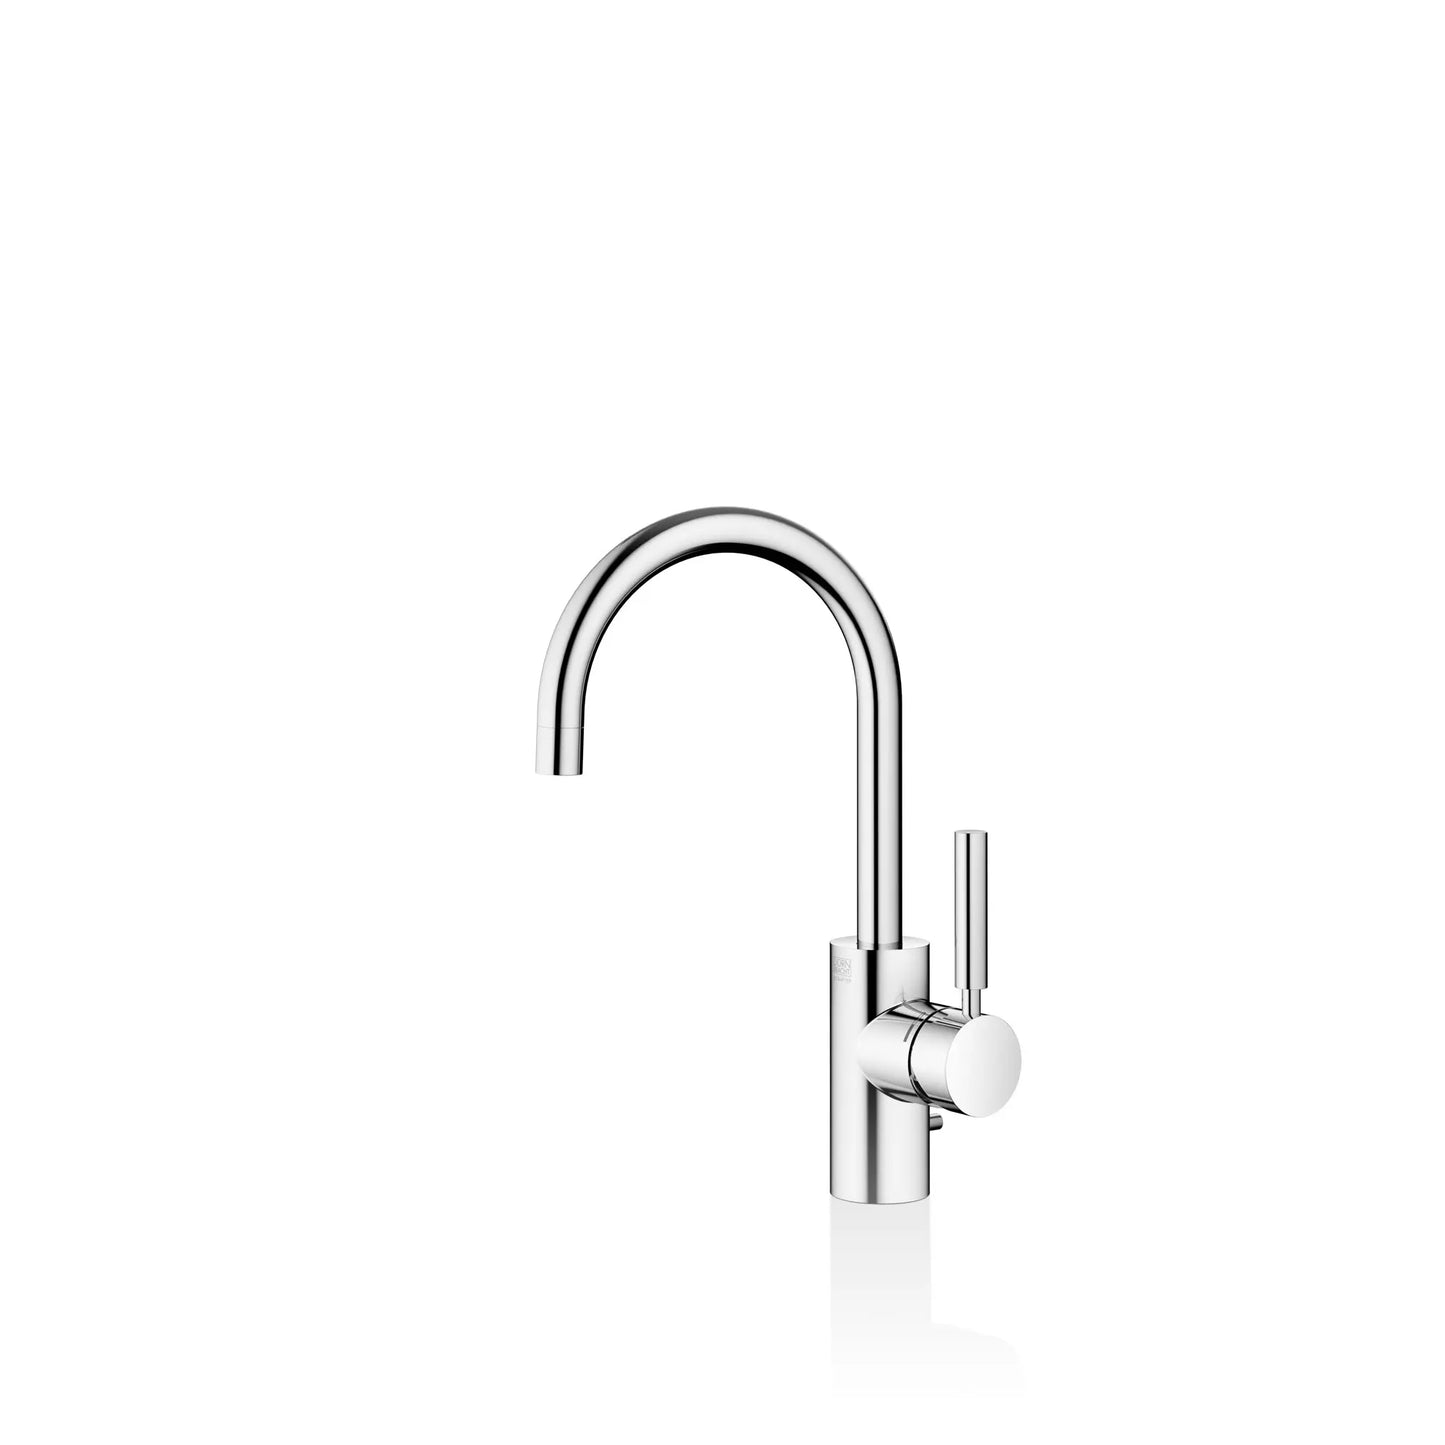 EDITION PRO Single-lever basin mixer with pop-up waste